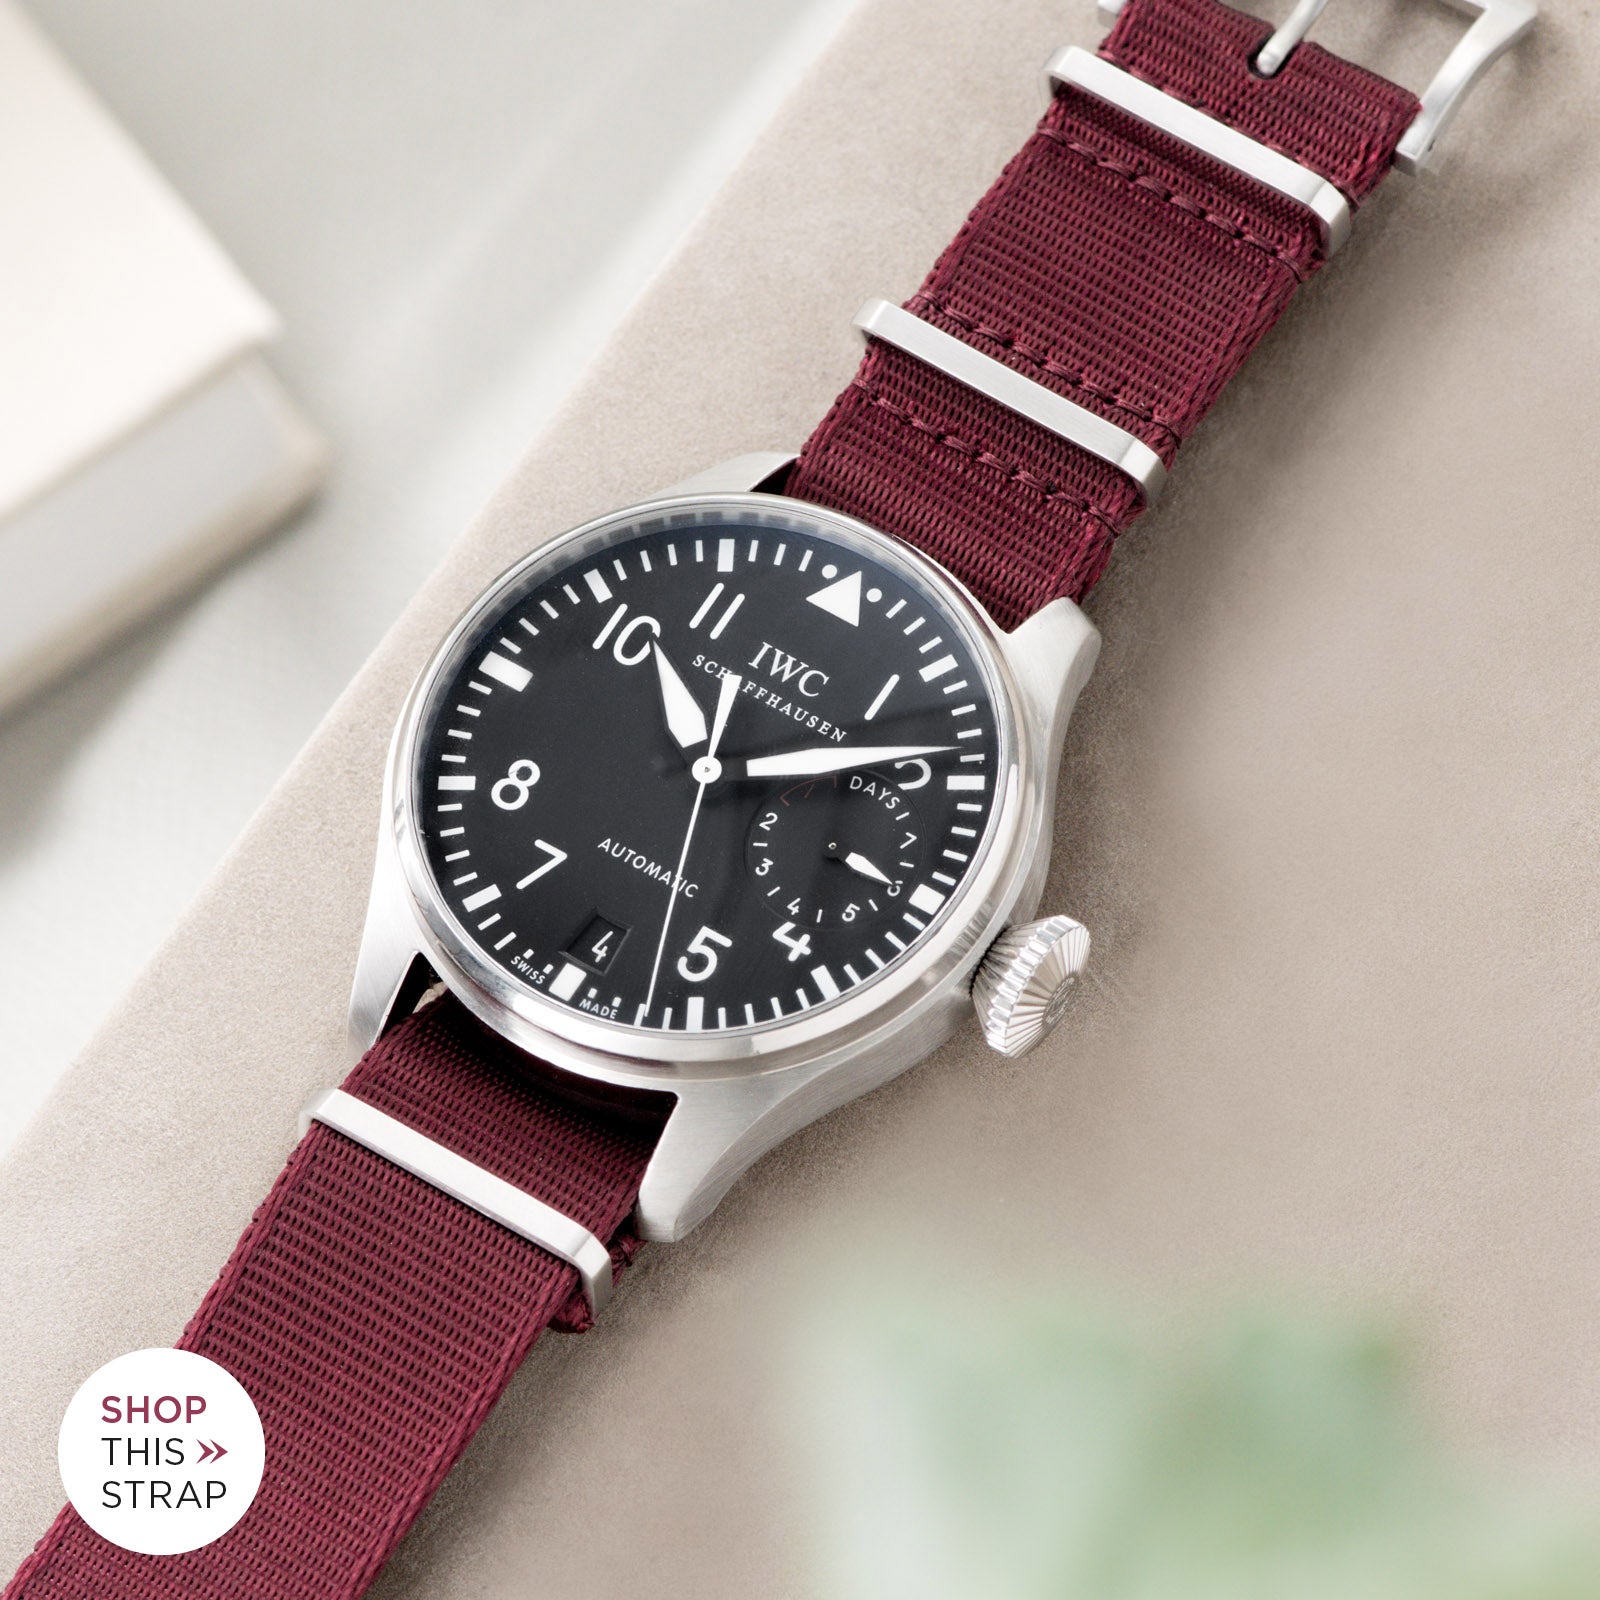 Bulang and Sons_Strap Guide_IWC Big Pilot Ref 5004_Deluxe Nylon Nato Watch Strap Burgundy Red